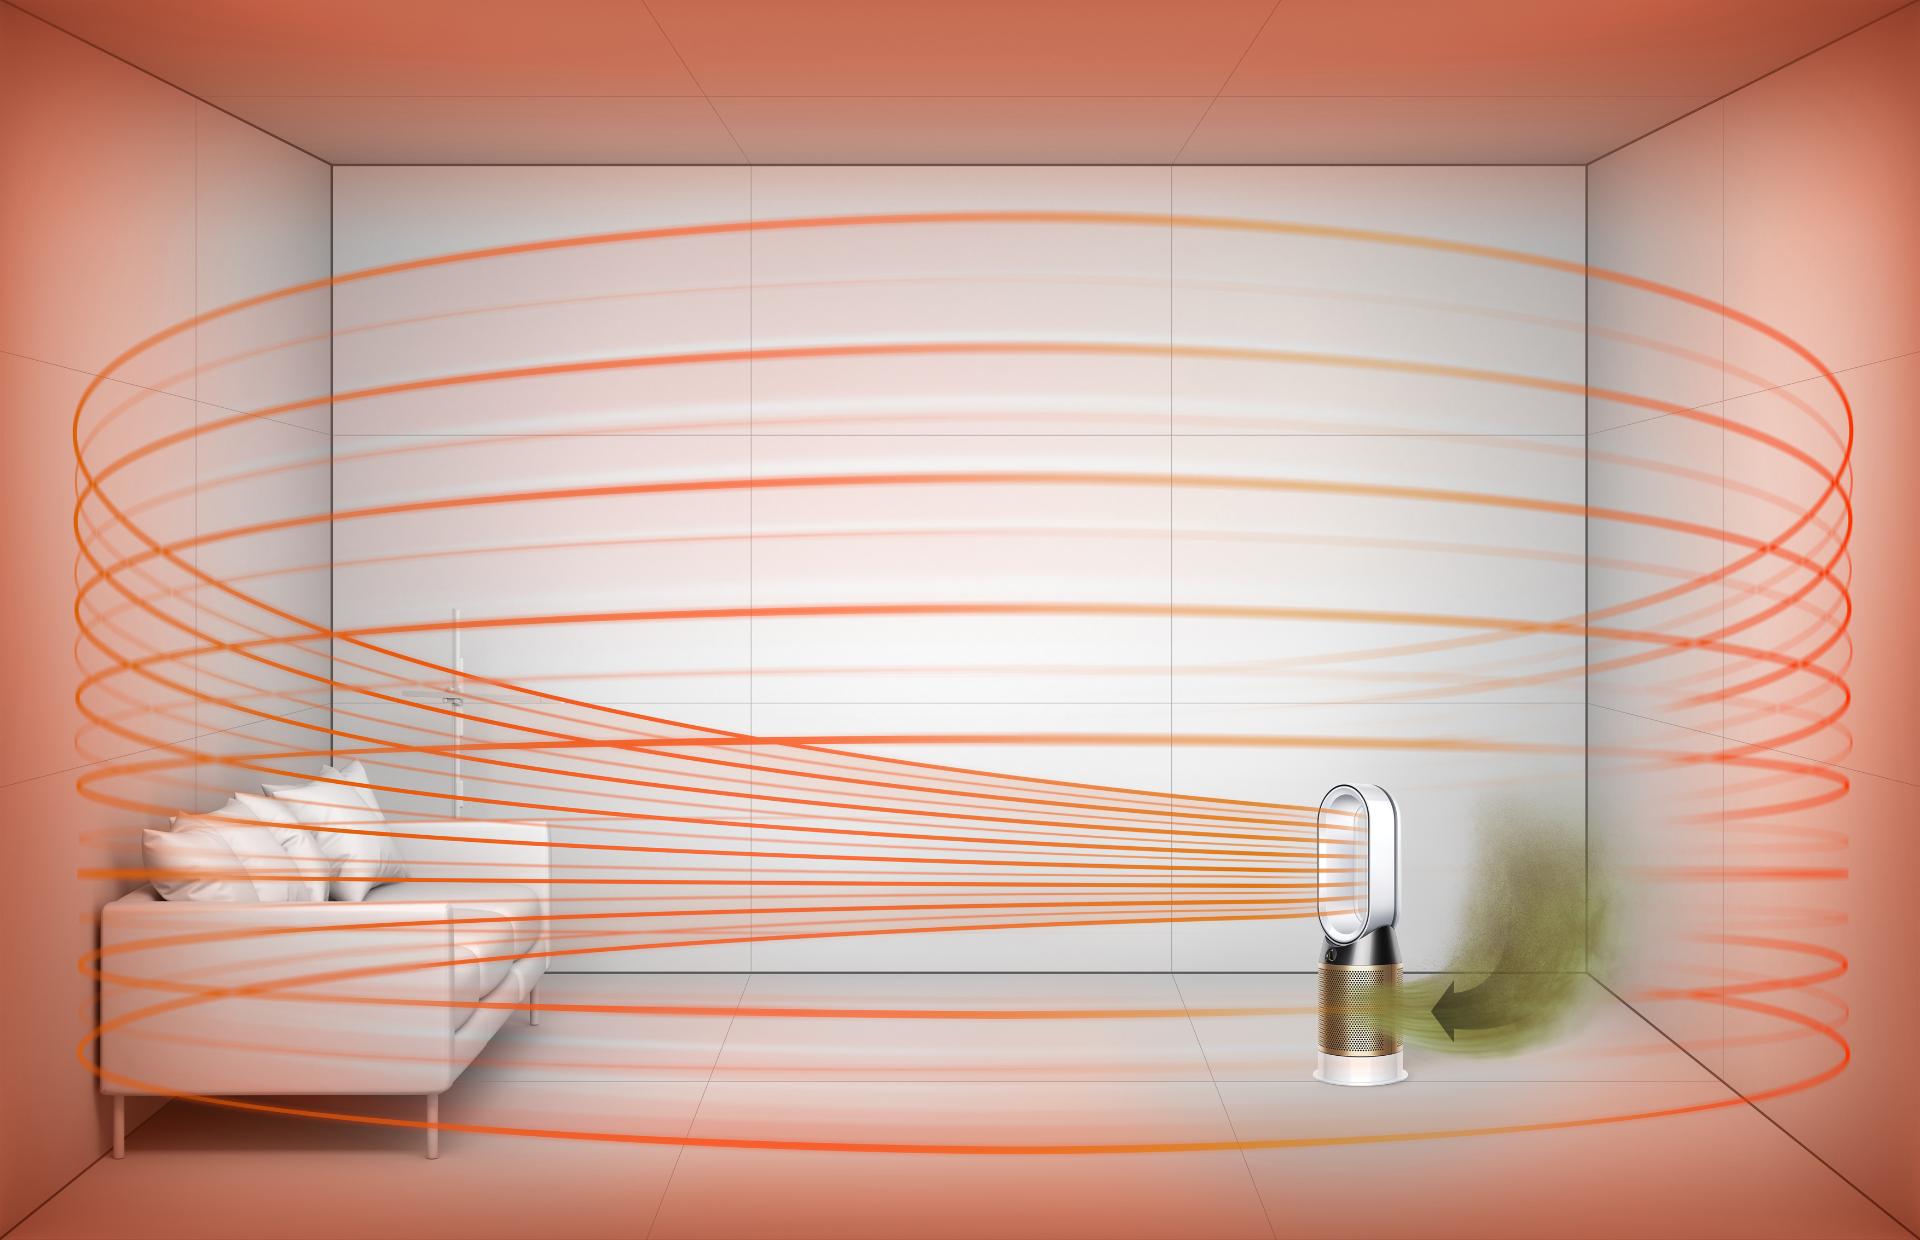 A Dyson purifier heater projecting cleaner, heated air. 